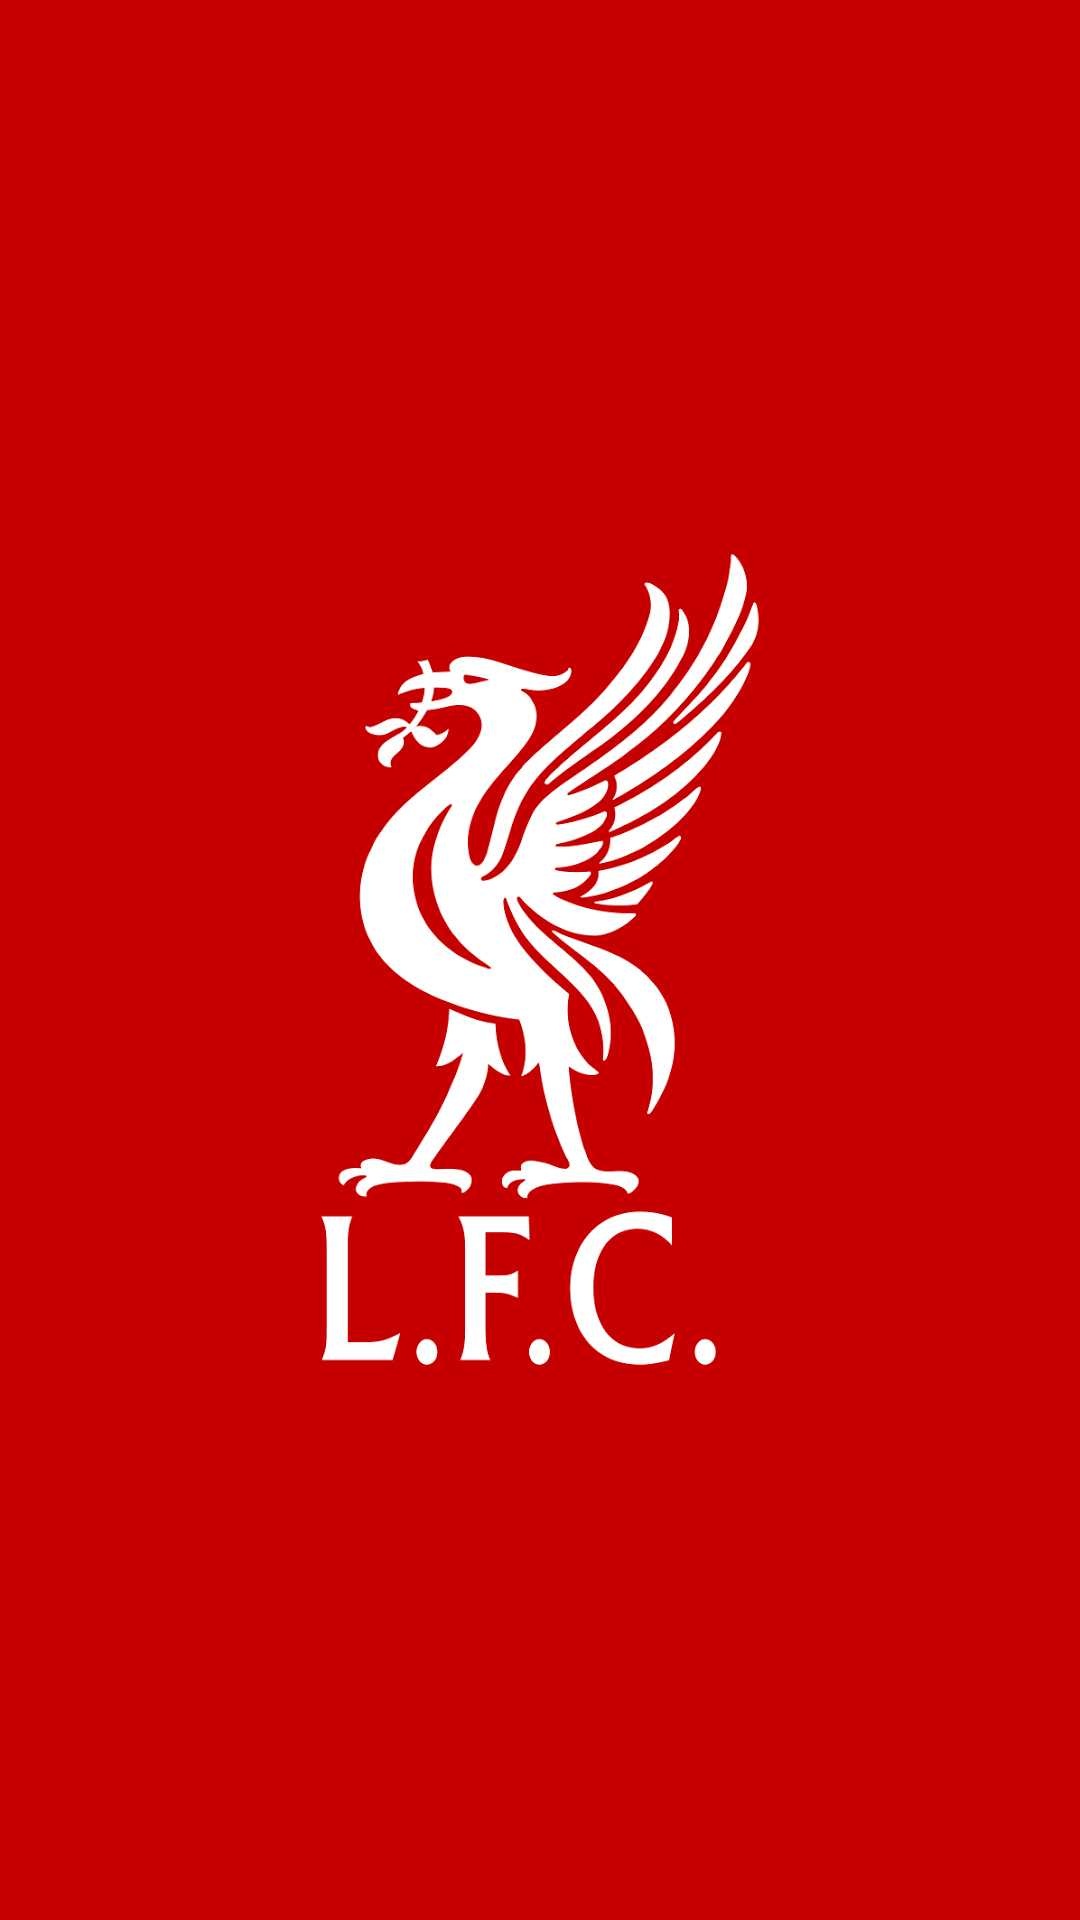 Liverpool Football Club: The main crest featured the iconic liver bird image, Emblem. 1080x1920 Full HD Wallpaper.